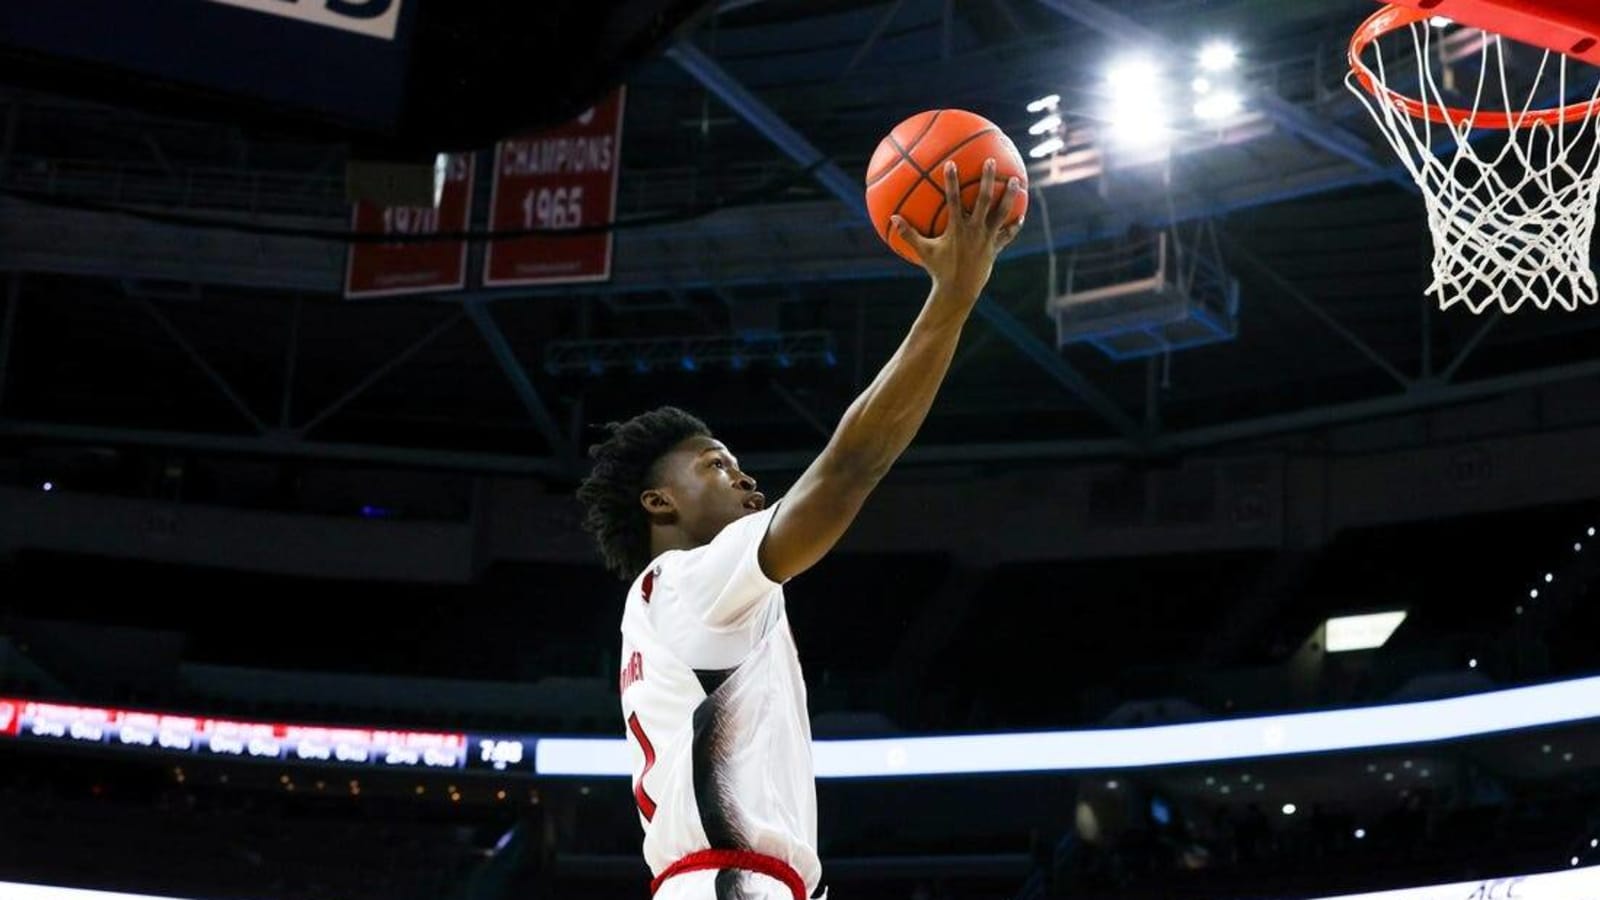 Morsell shines as NC State breezes past William & Mary